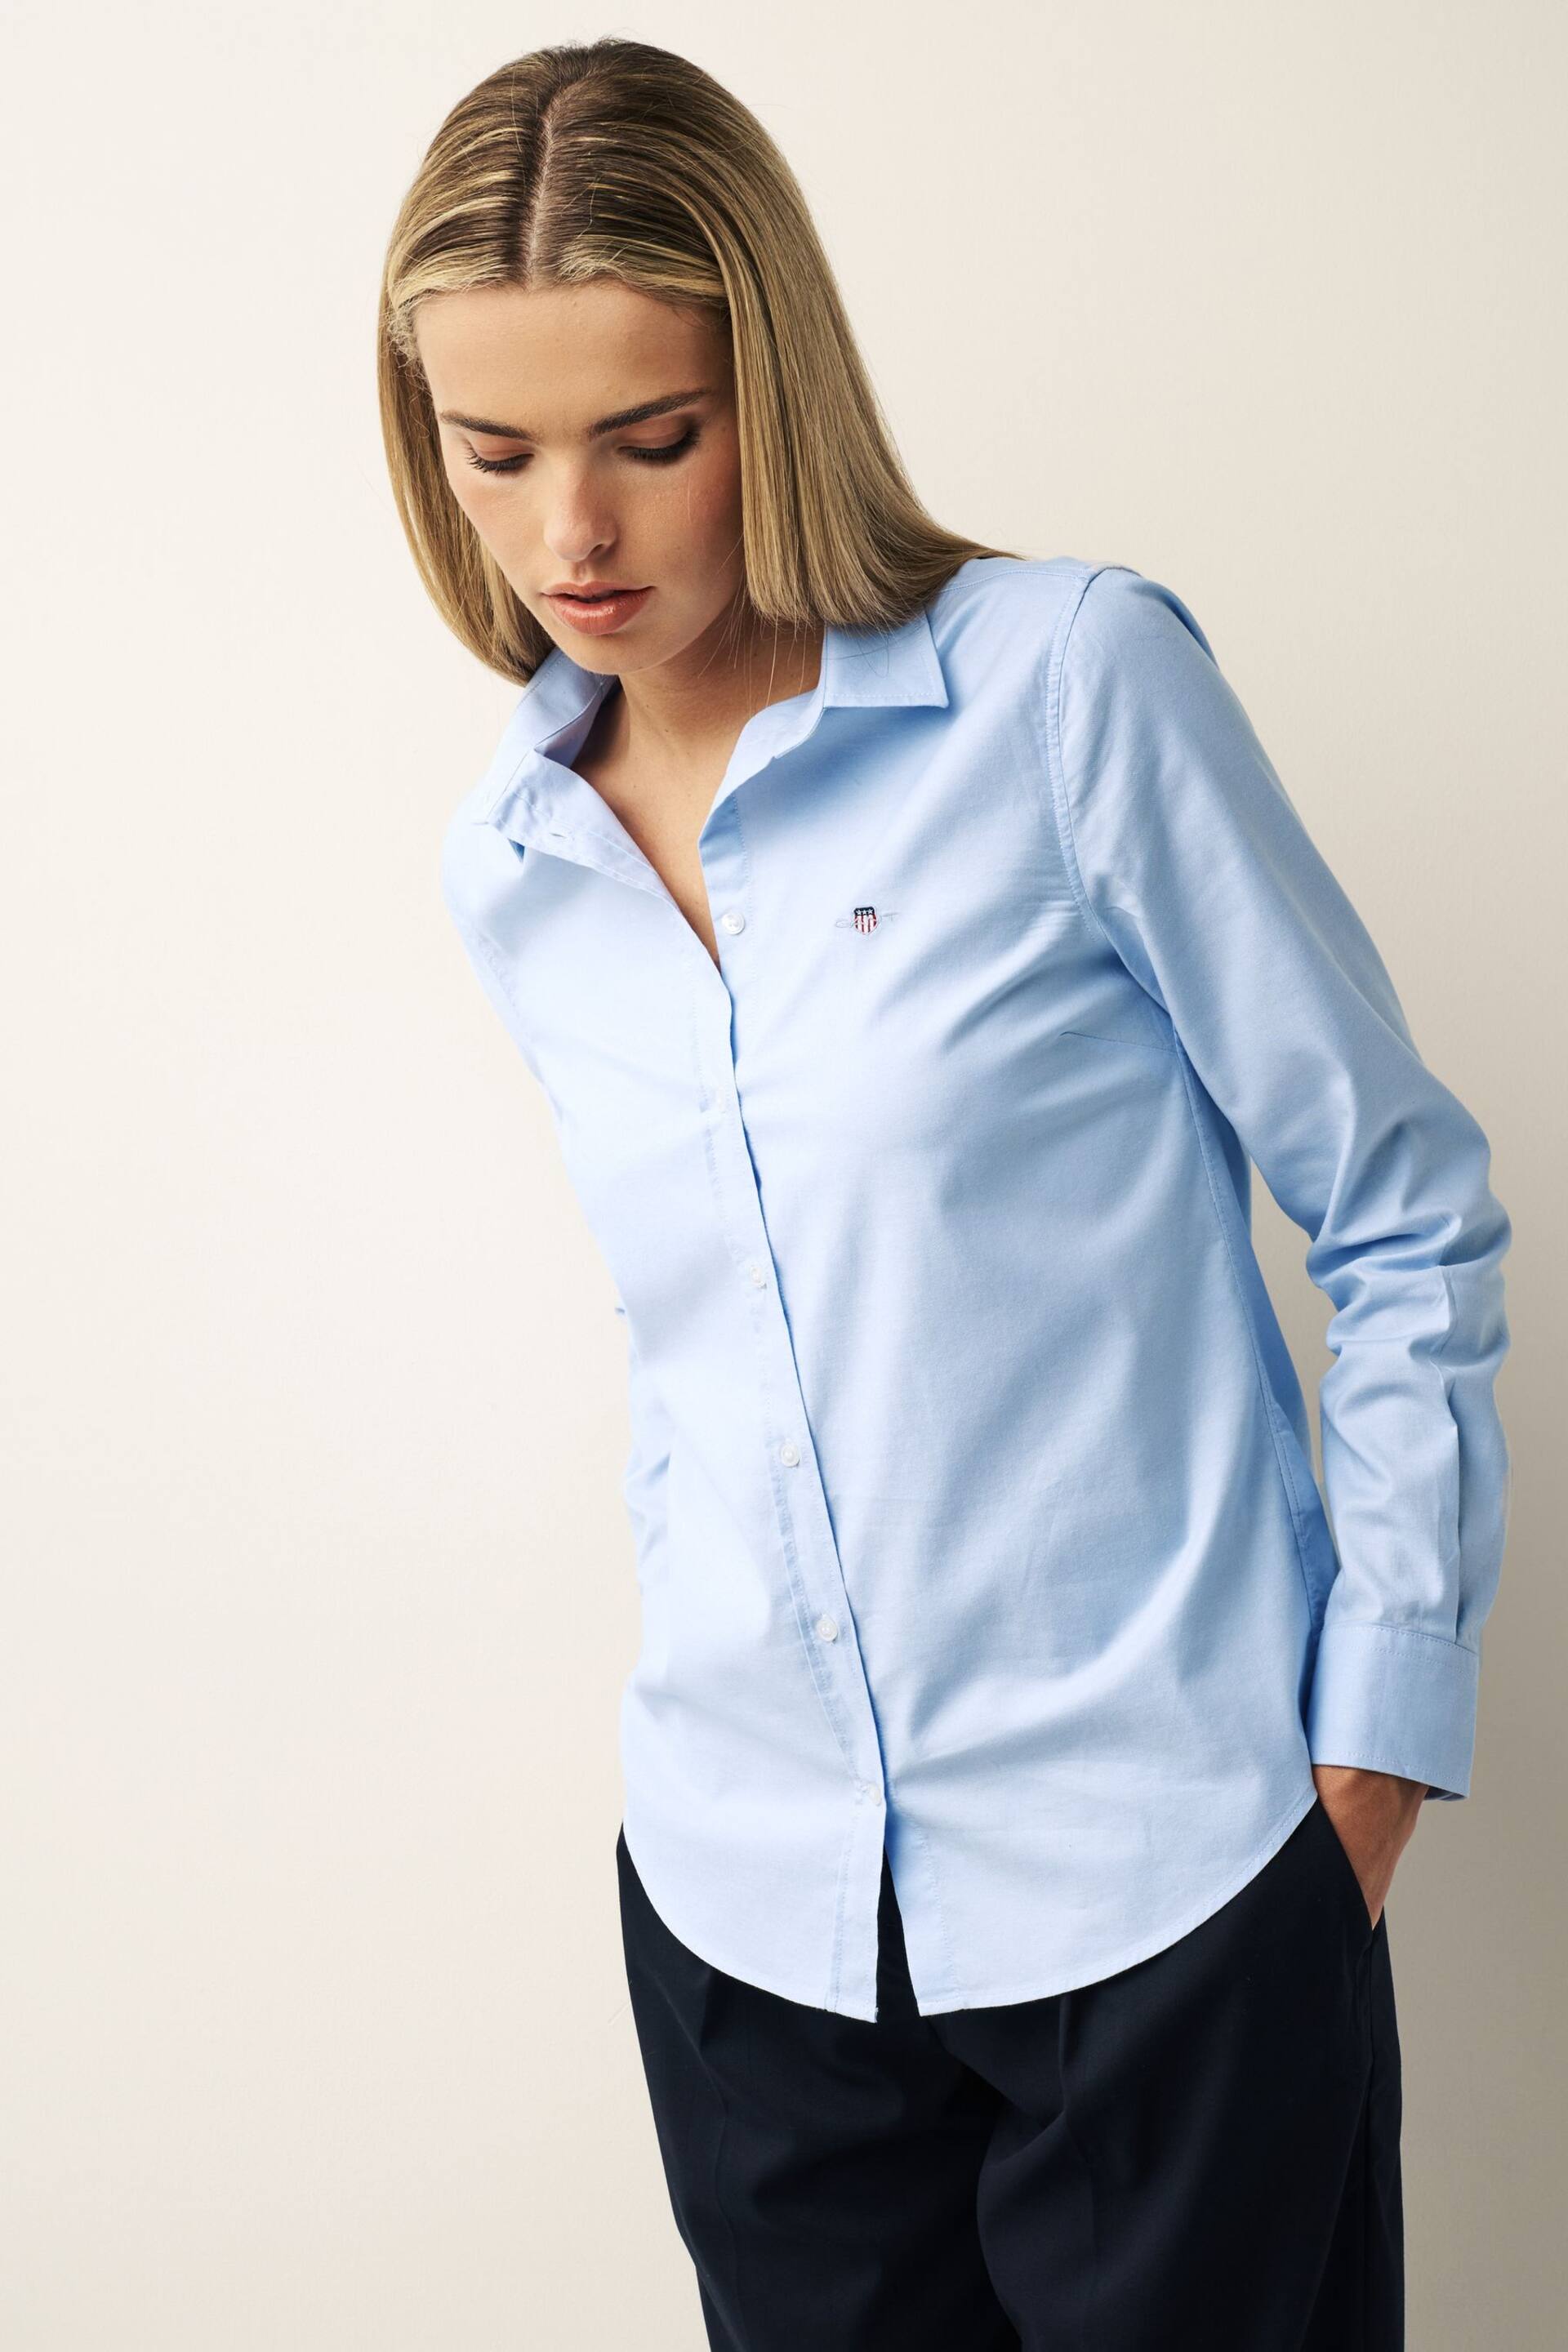 GANT Blue Fitted Stretch Oxford Shirt - Image 1 of 5